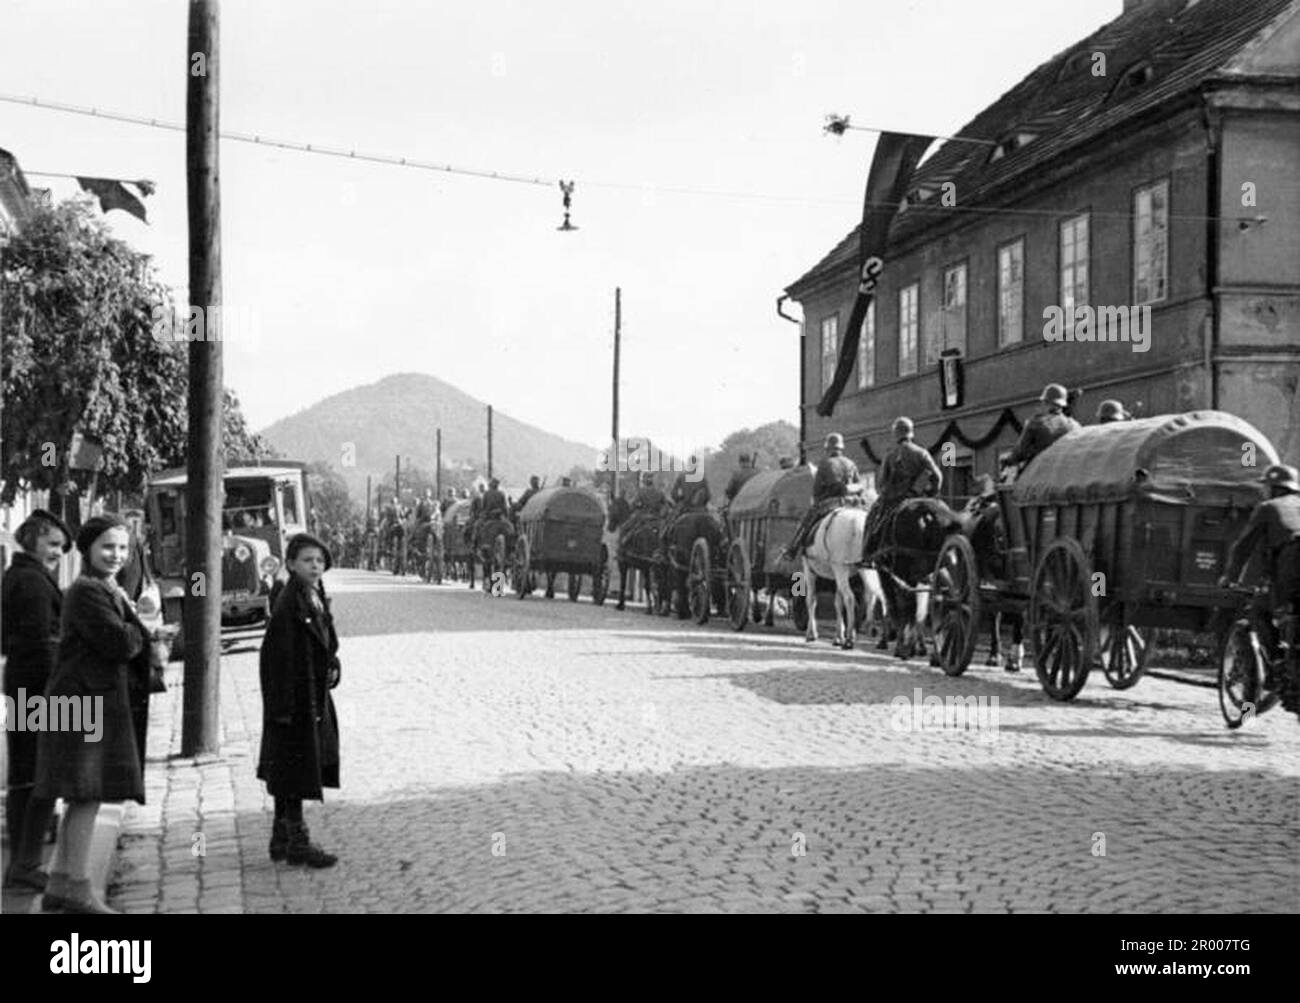 German troops marching through Böhmen-Kamnitz in Czechoslovakia on  7.Oct.1938 during the anexation of the Sudetenland. After the annexation of Austria, Hitler demanded that he be given the Sudeten region of Czechoslovakia. At the Munich conference in September 1938 the Western powers agreed to this and the nazis occupied the area. Not long after Hitler broke his promise and invaded the rest of Czechoslovakia before turning his attention to Poland. Stock Photo